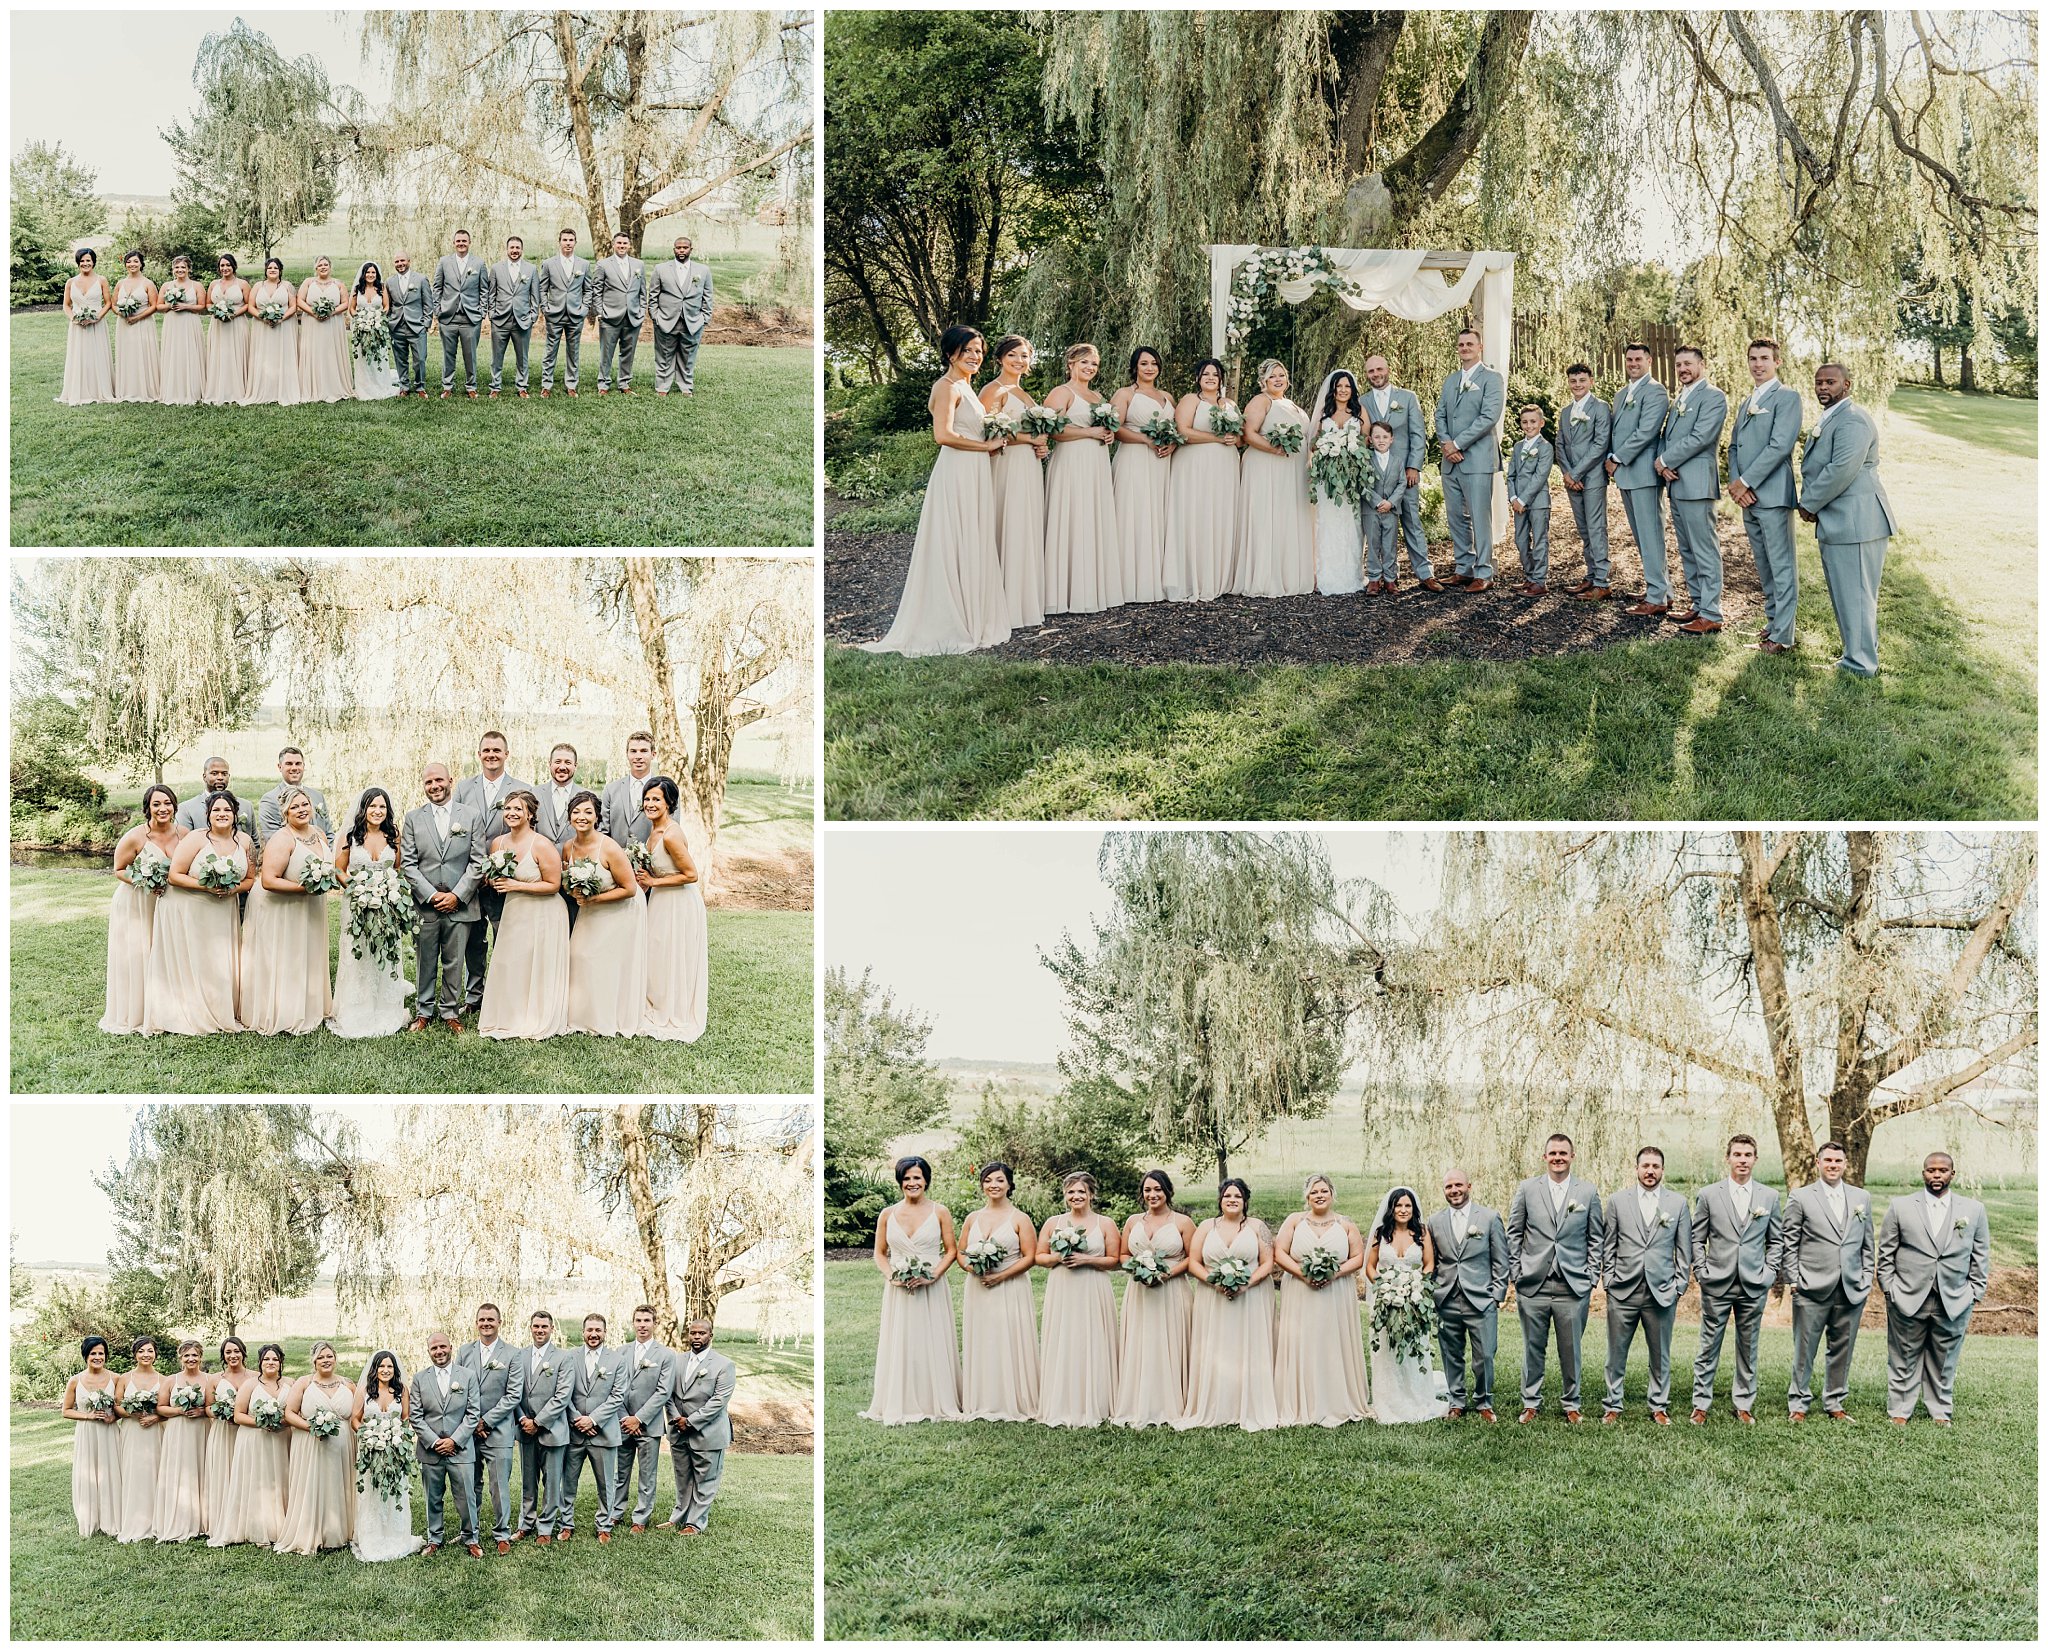 Bridal party portraits at Rustic Acres Farm in Pittsburgh